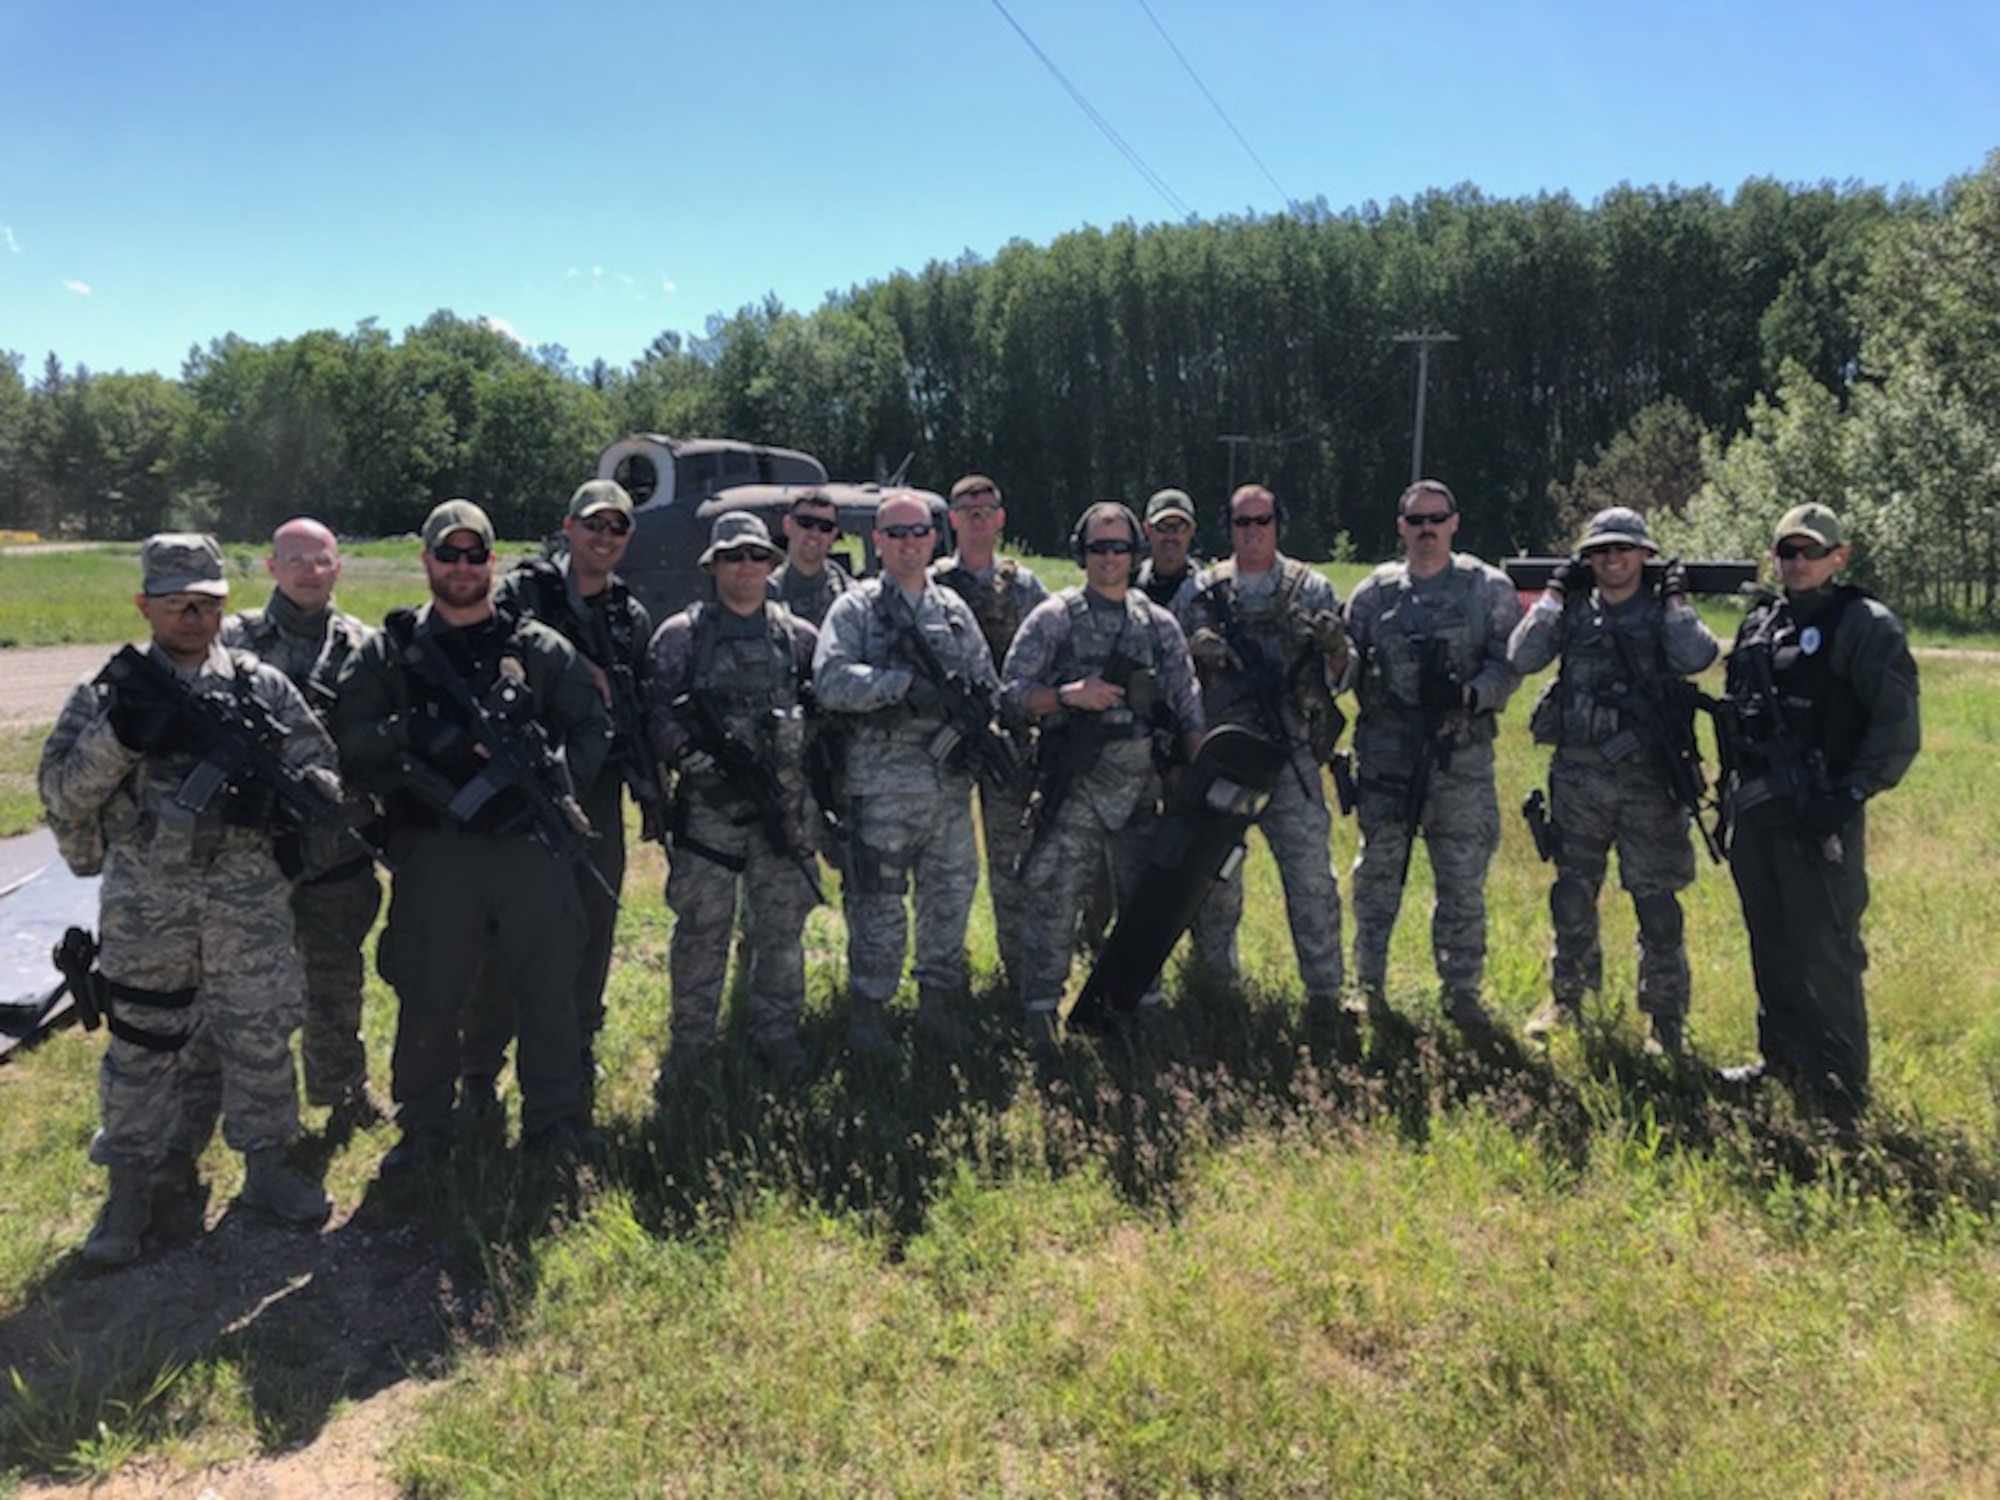 Five members of the Ohio Department of Rehabilitation and Correction’s Special Tactics and Response Team partner with 178th Wing Security Forces Squadron to conduct training at the Alpena Combat Readiness Training Center, Mich., June 11-15, 2018. STAR instructors trained Airmen in less-than lethal weapons tactics, riot control, active shooter response, building clearing and personnel tracking.